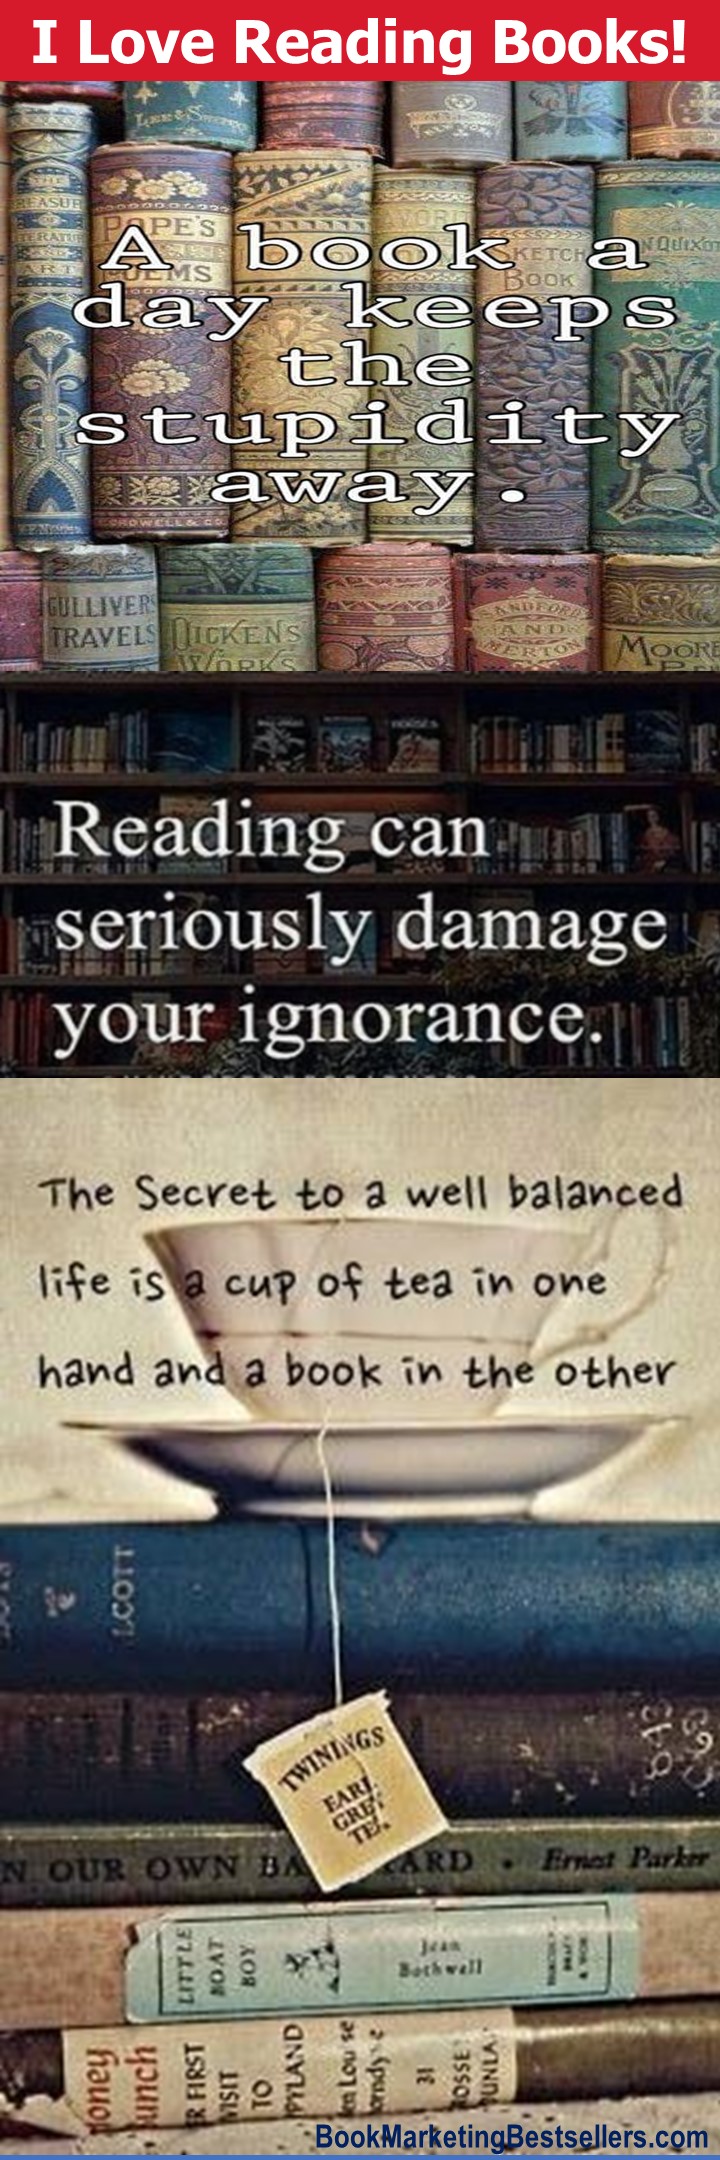 I Love Reading Books! A book a day keeps the stupidity away. Reading can seriously damage your ignorance. The secret to a well-balanced life is a cup of tea in one hand and a book in the other. #books #reading #readers #writers